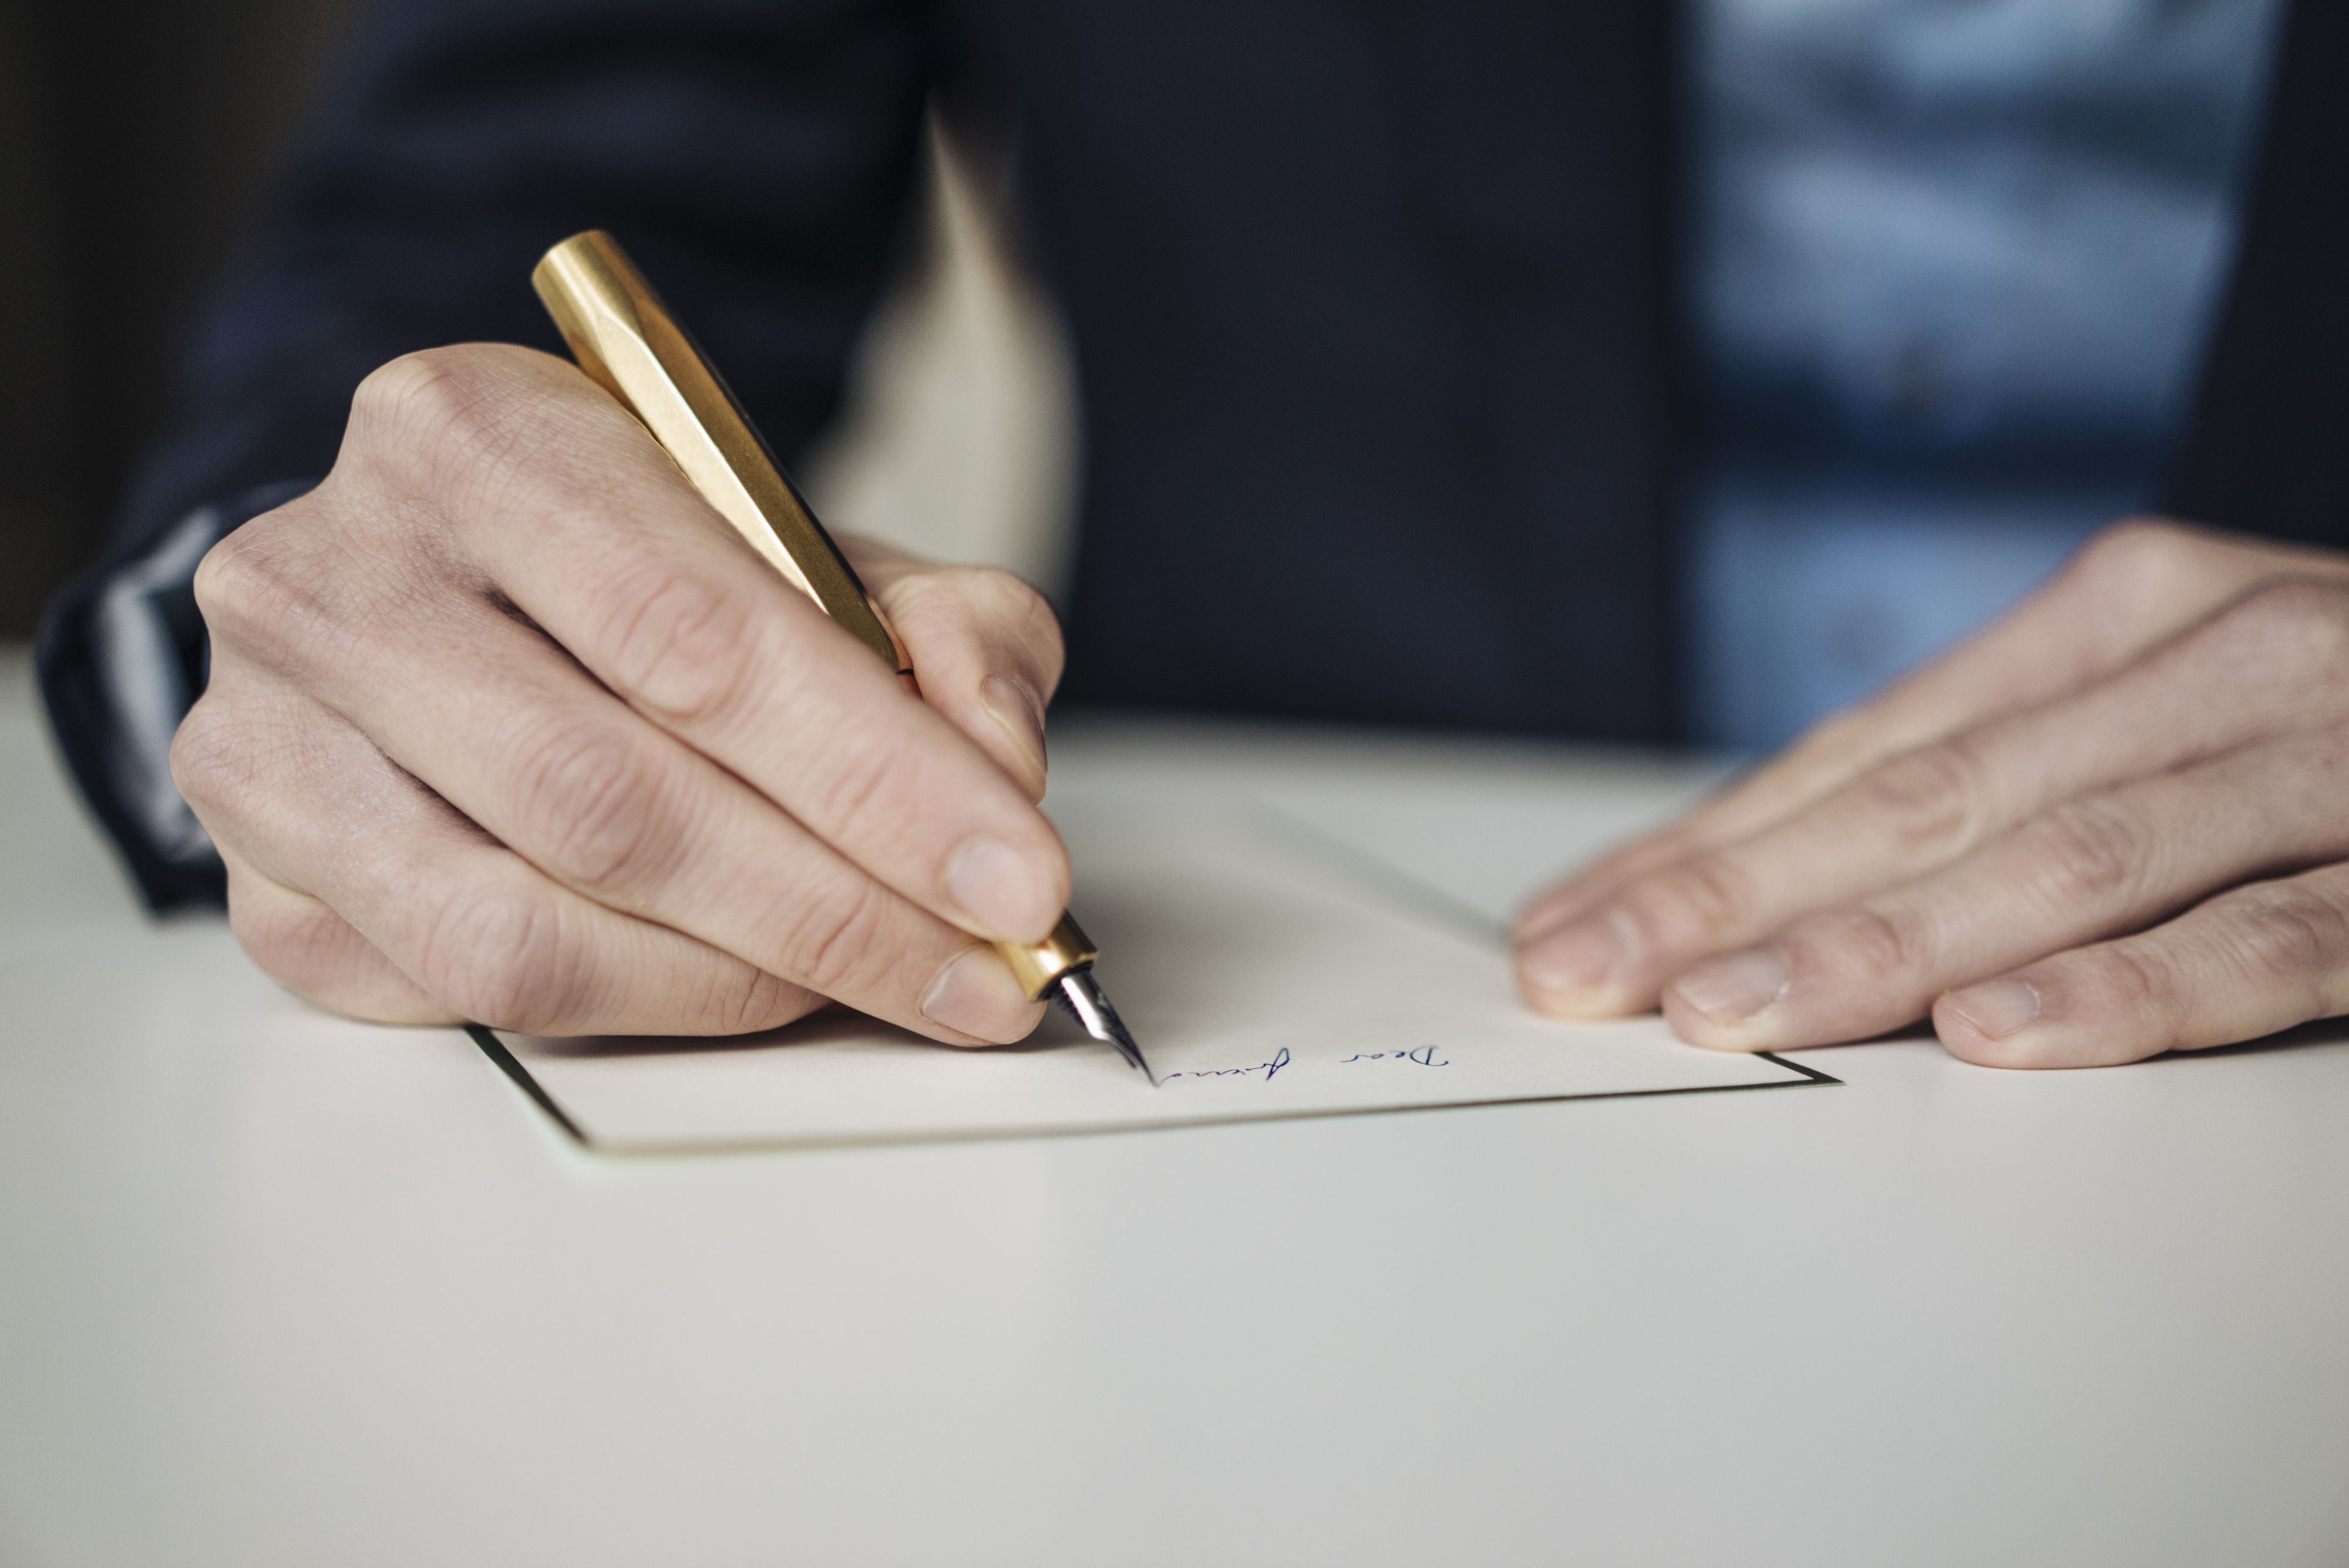 Person signing a document, focused on hands and pen, implying a professional agreement or contract